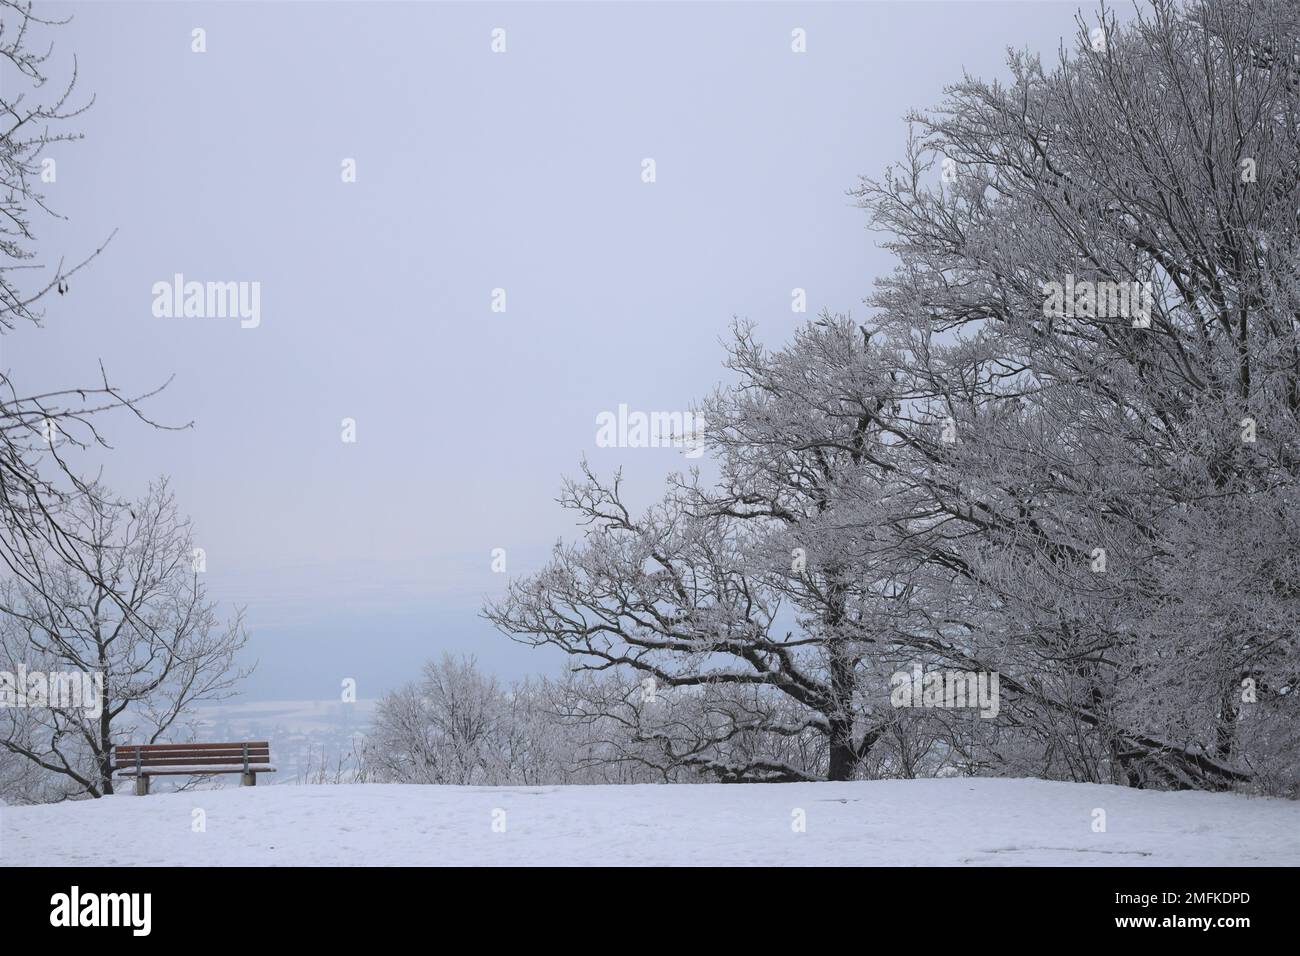 inviting Bench on wintry Vantage point Stock Photo